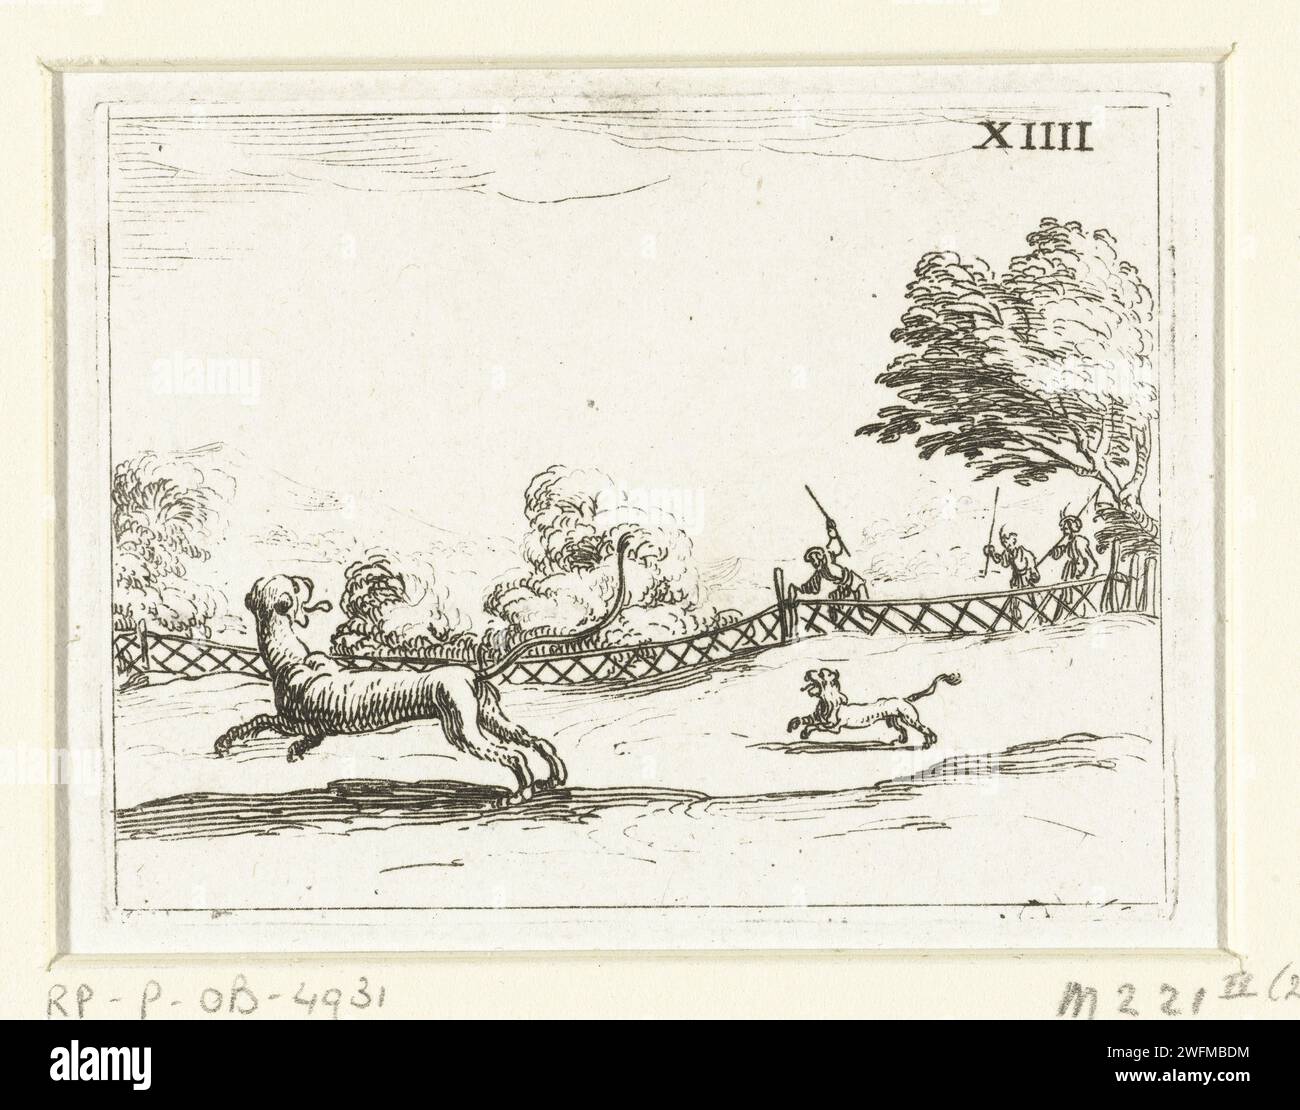 Hunters chase a lioness and her cub, Jacques Callot, 1646 print Presentation of a lioness and her cub, who run away for a number of hunters. This magazine is part of the emblem series 'Life of Maria in Emblemen'. In addition to a title page and 26 emblems, the first state of this series also includes three blades with hymns on Maria in book print without image. print maker: Nancypublisher: Paris paper etching lion hunt Stock Photo